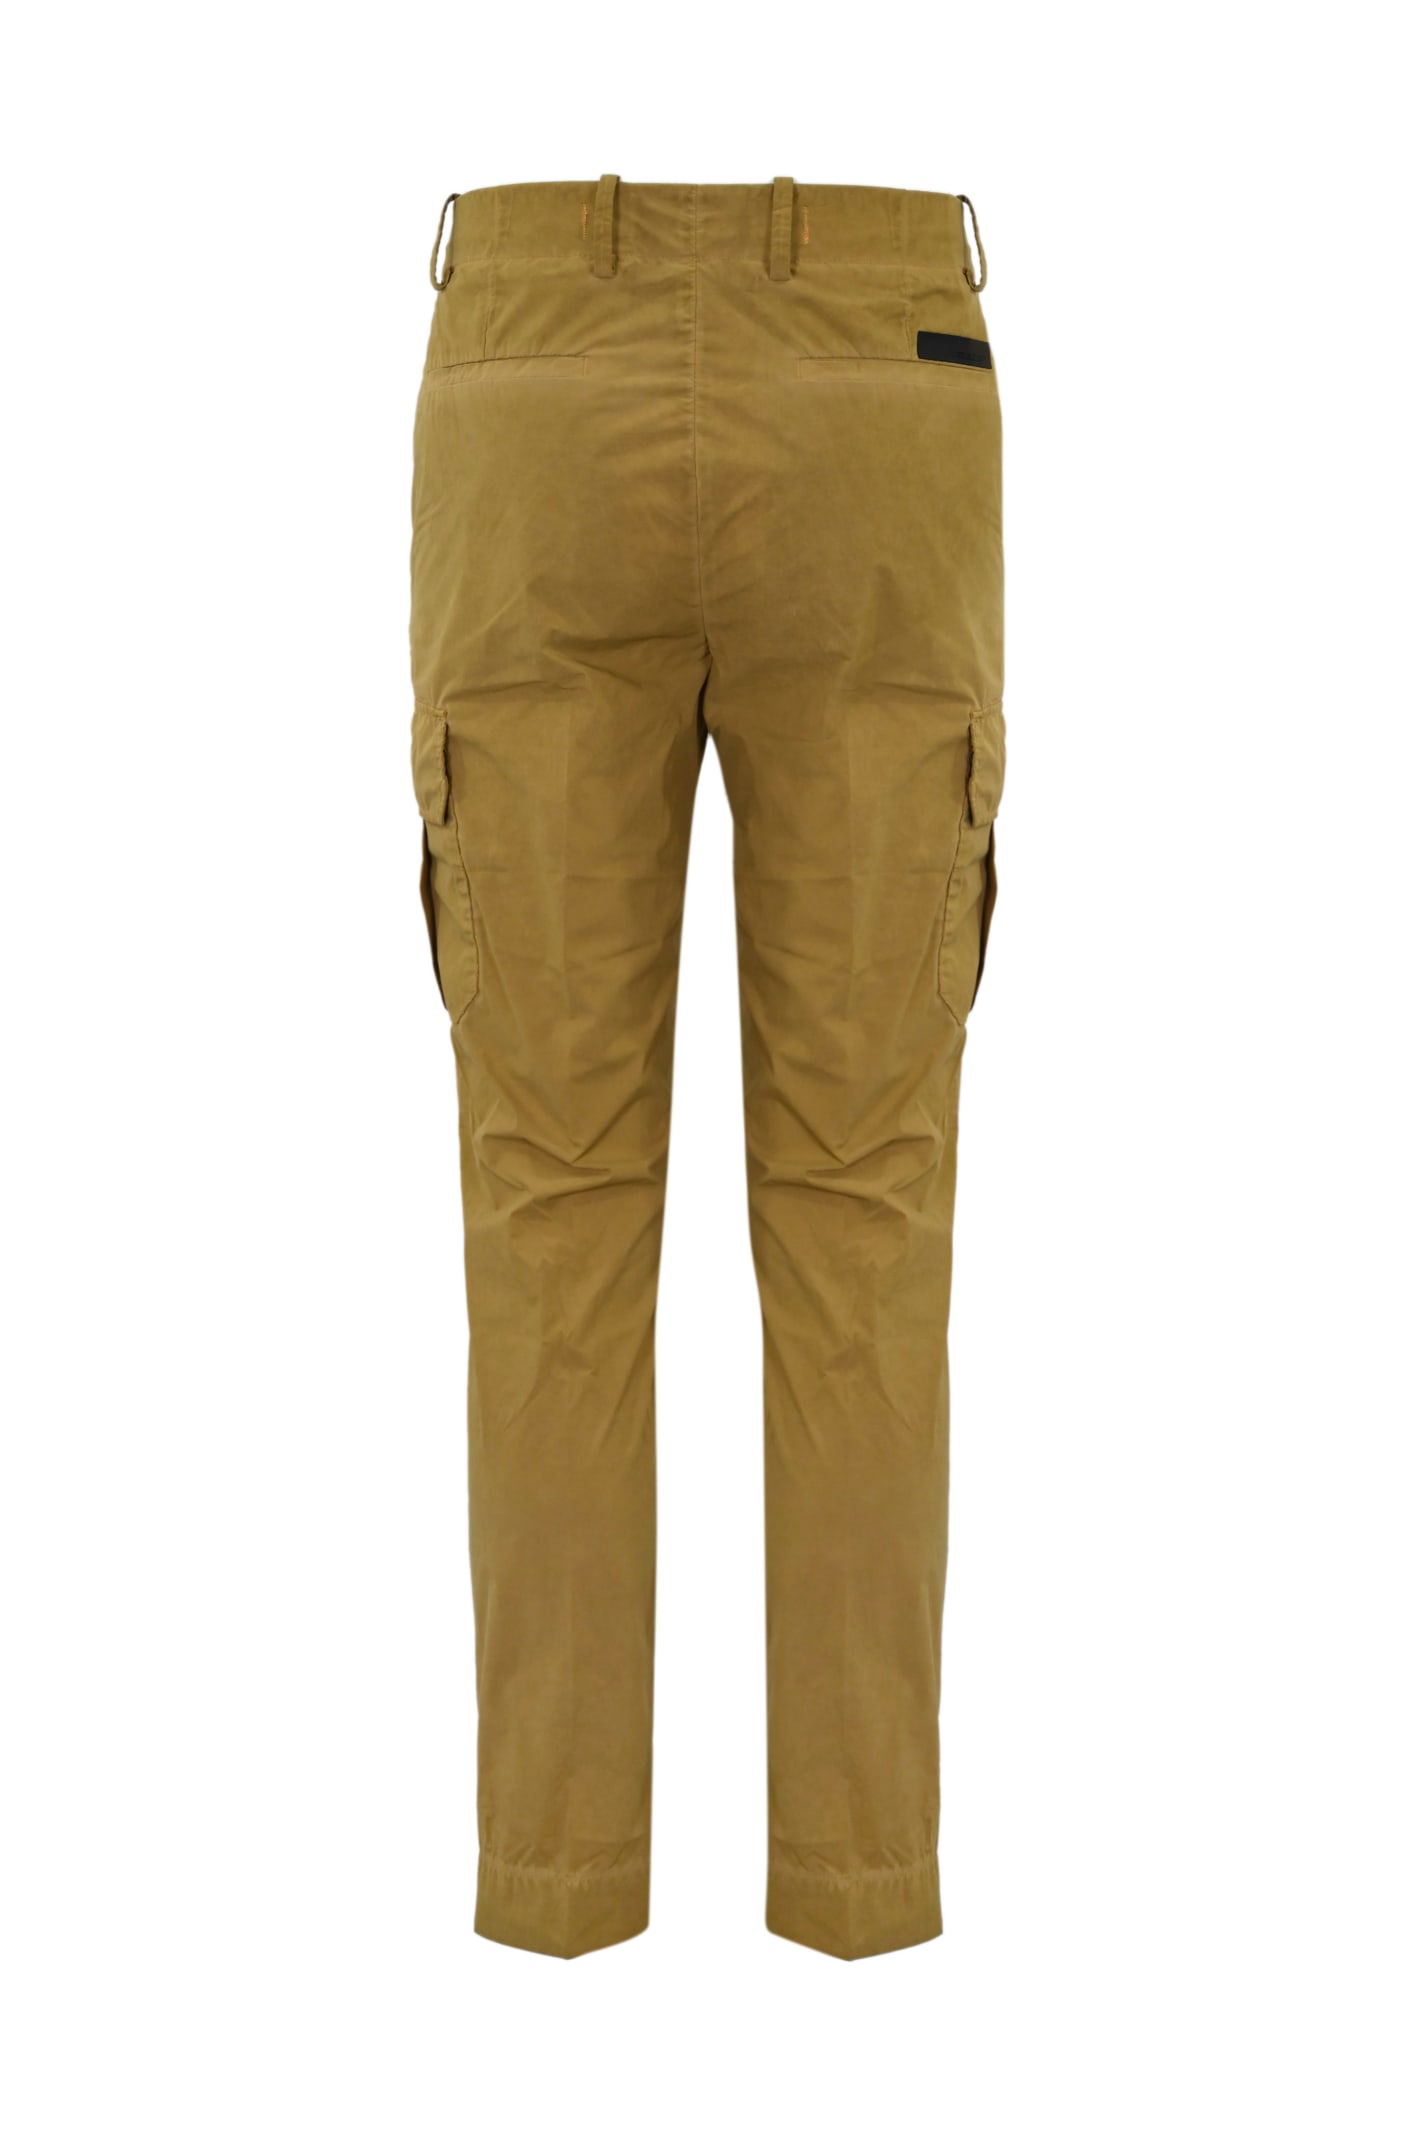 Shop Rrd - Roberto Ricci Design Extralight Gdy Cargo Trousers In Tabacco